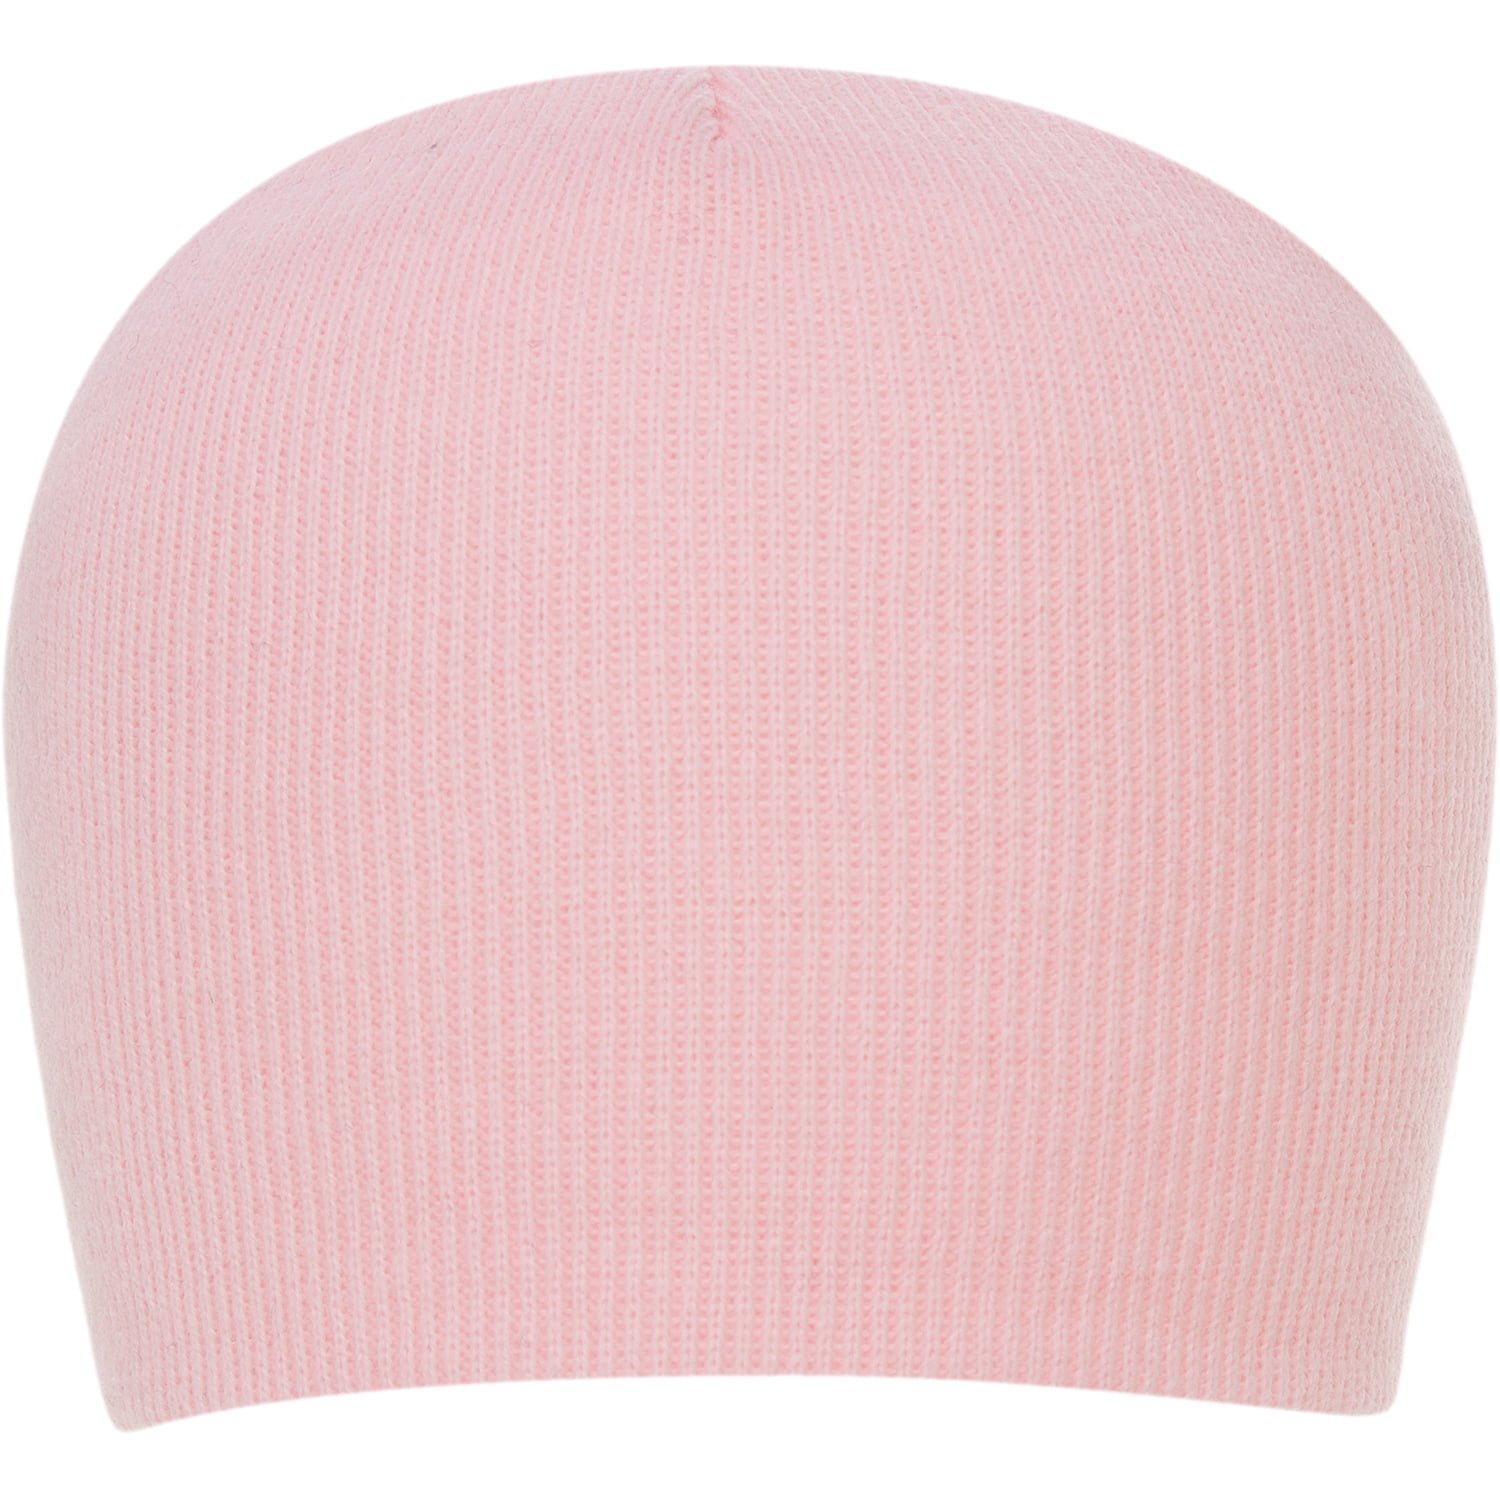 1pc Solid Light Pink Beanie Winter Knit Hat - Made in USA - Single Piece